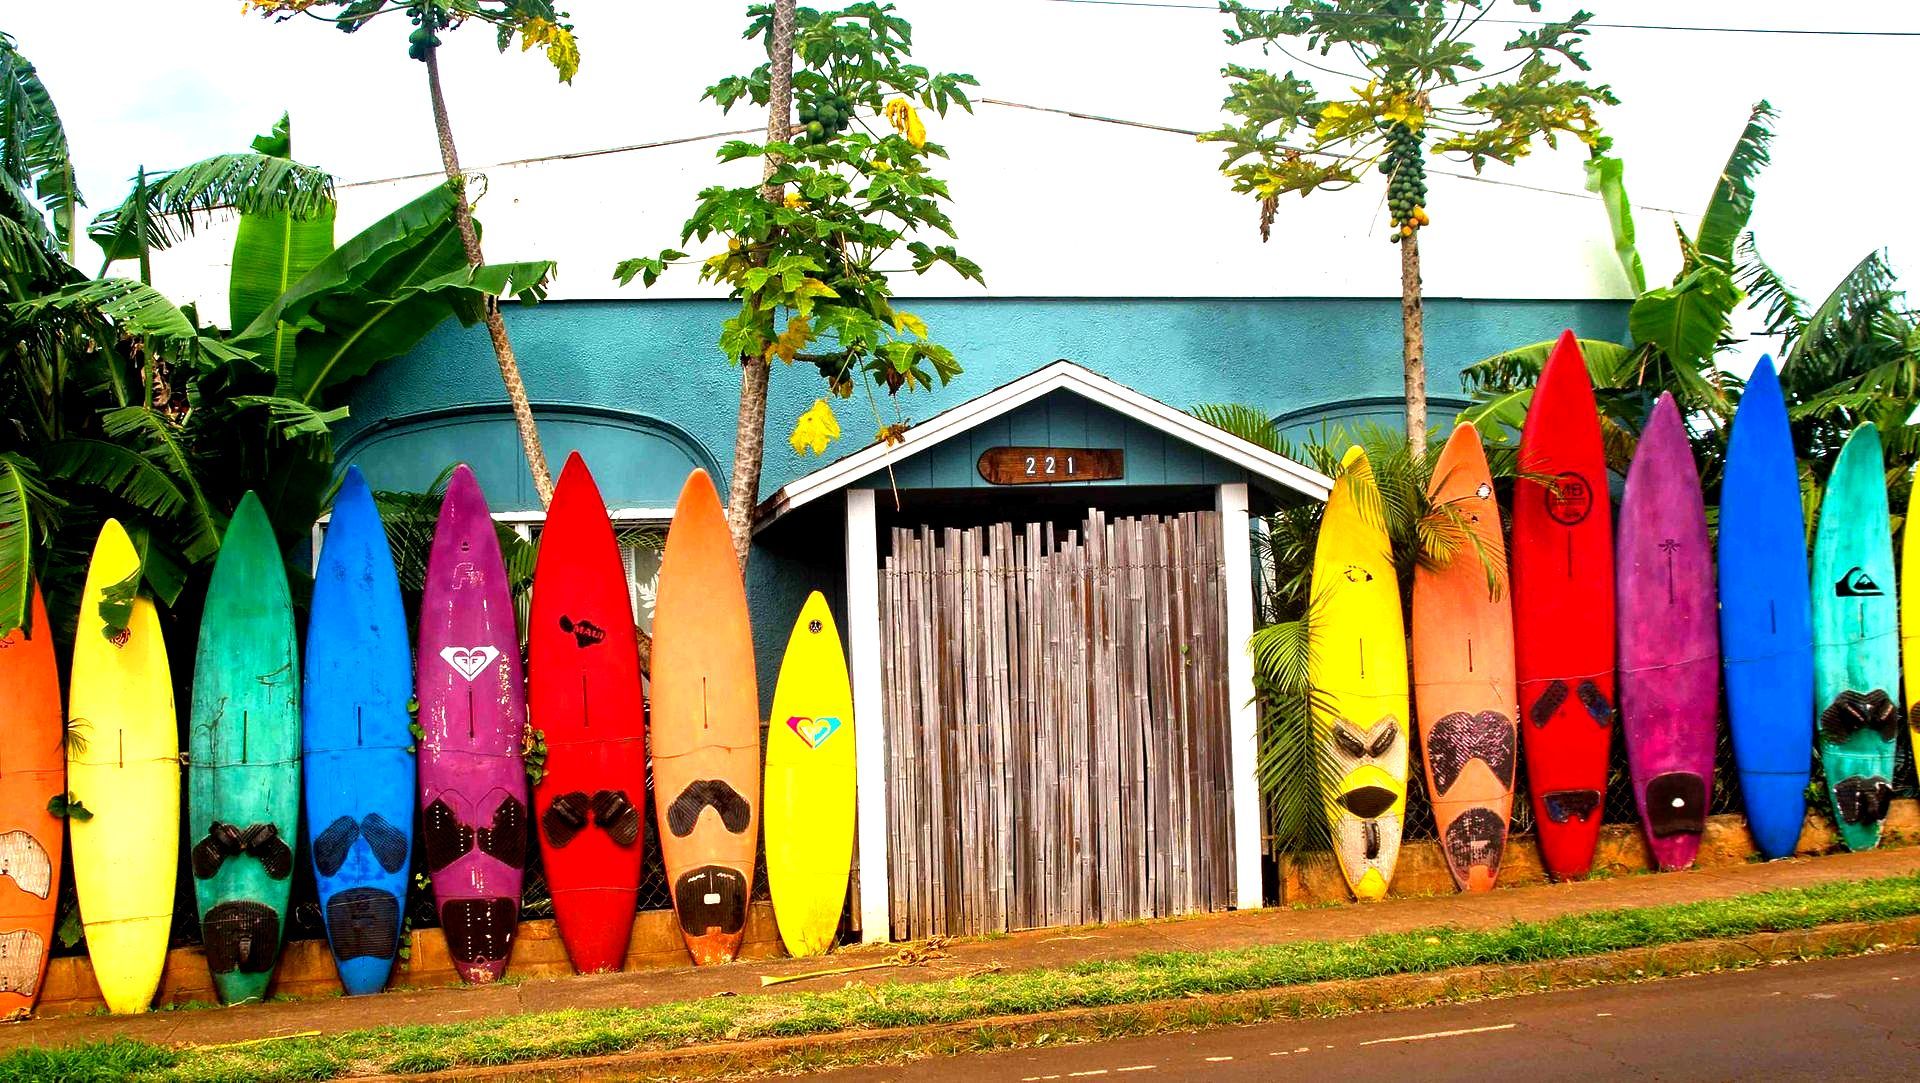 
World's Largest Collection of Surfboards, world record in Haiku, Maui, Hawaii